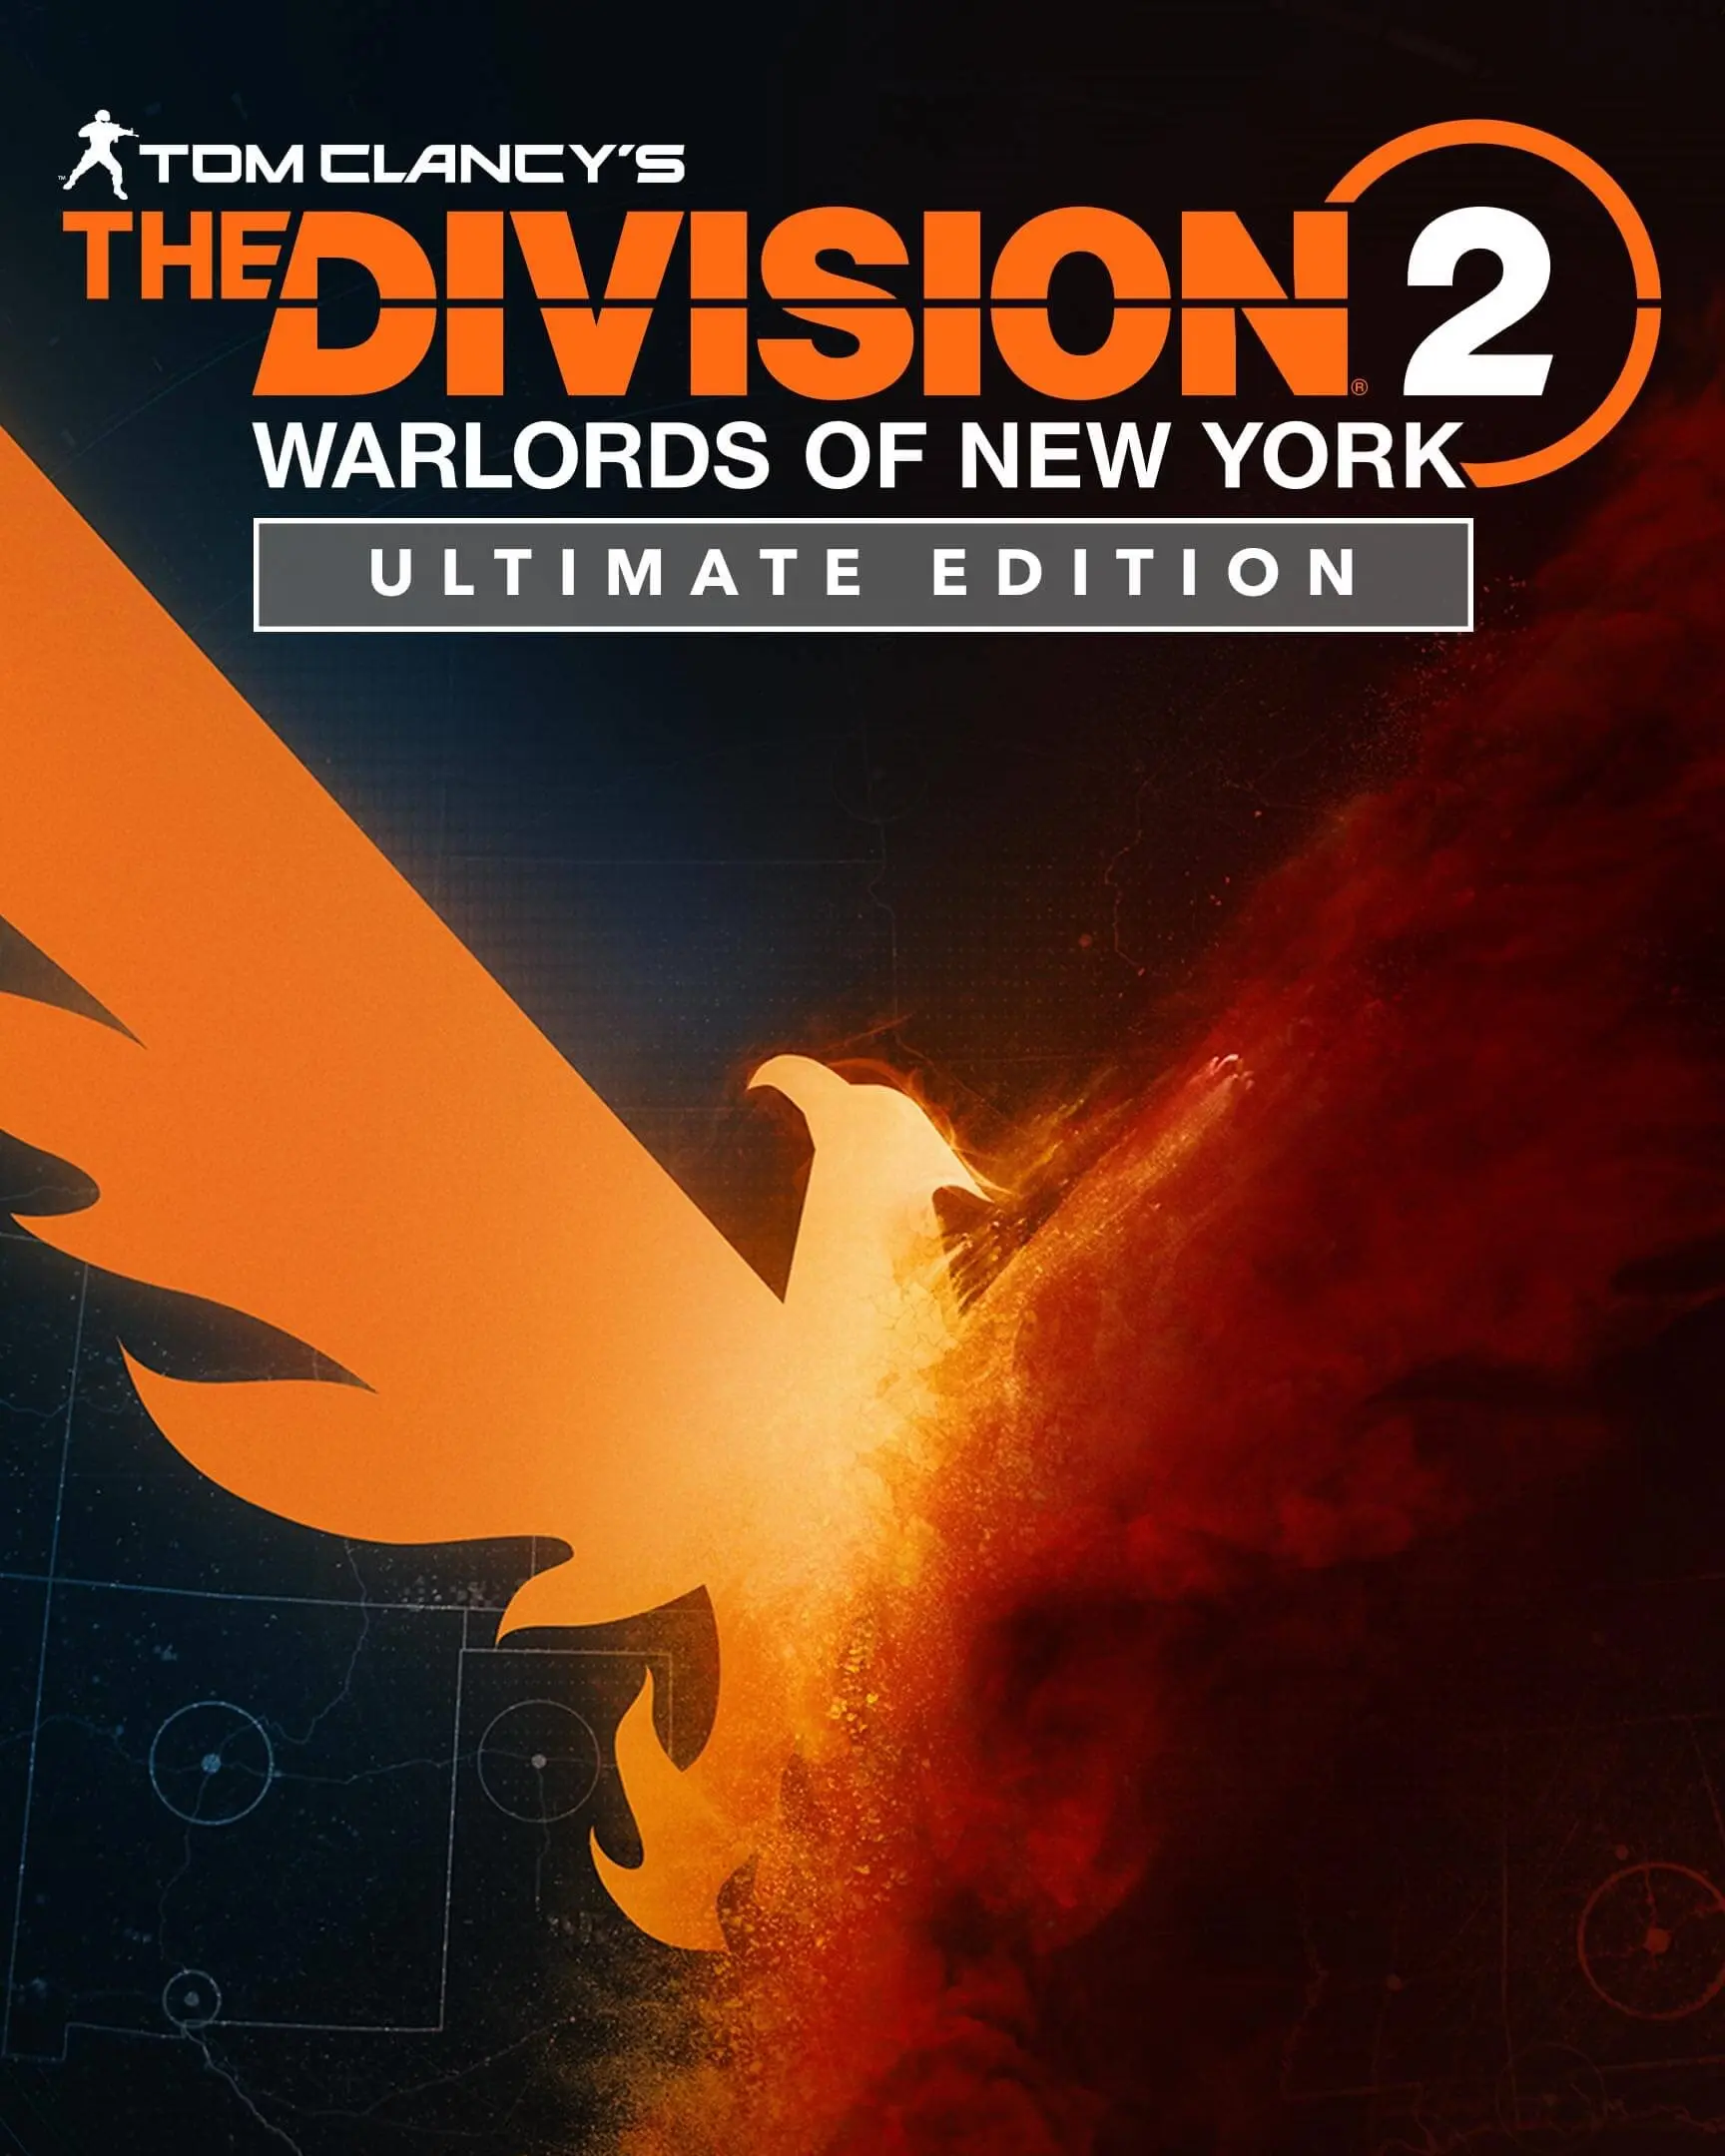 Tom Clancy's The Division 2: Warlords of New York Ultimate Edition (AR) (Xbox One / Xbox Series X|S) - Xbox Live - Digital Code